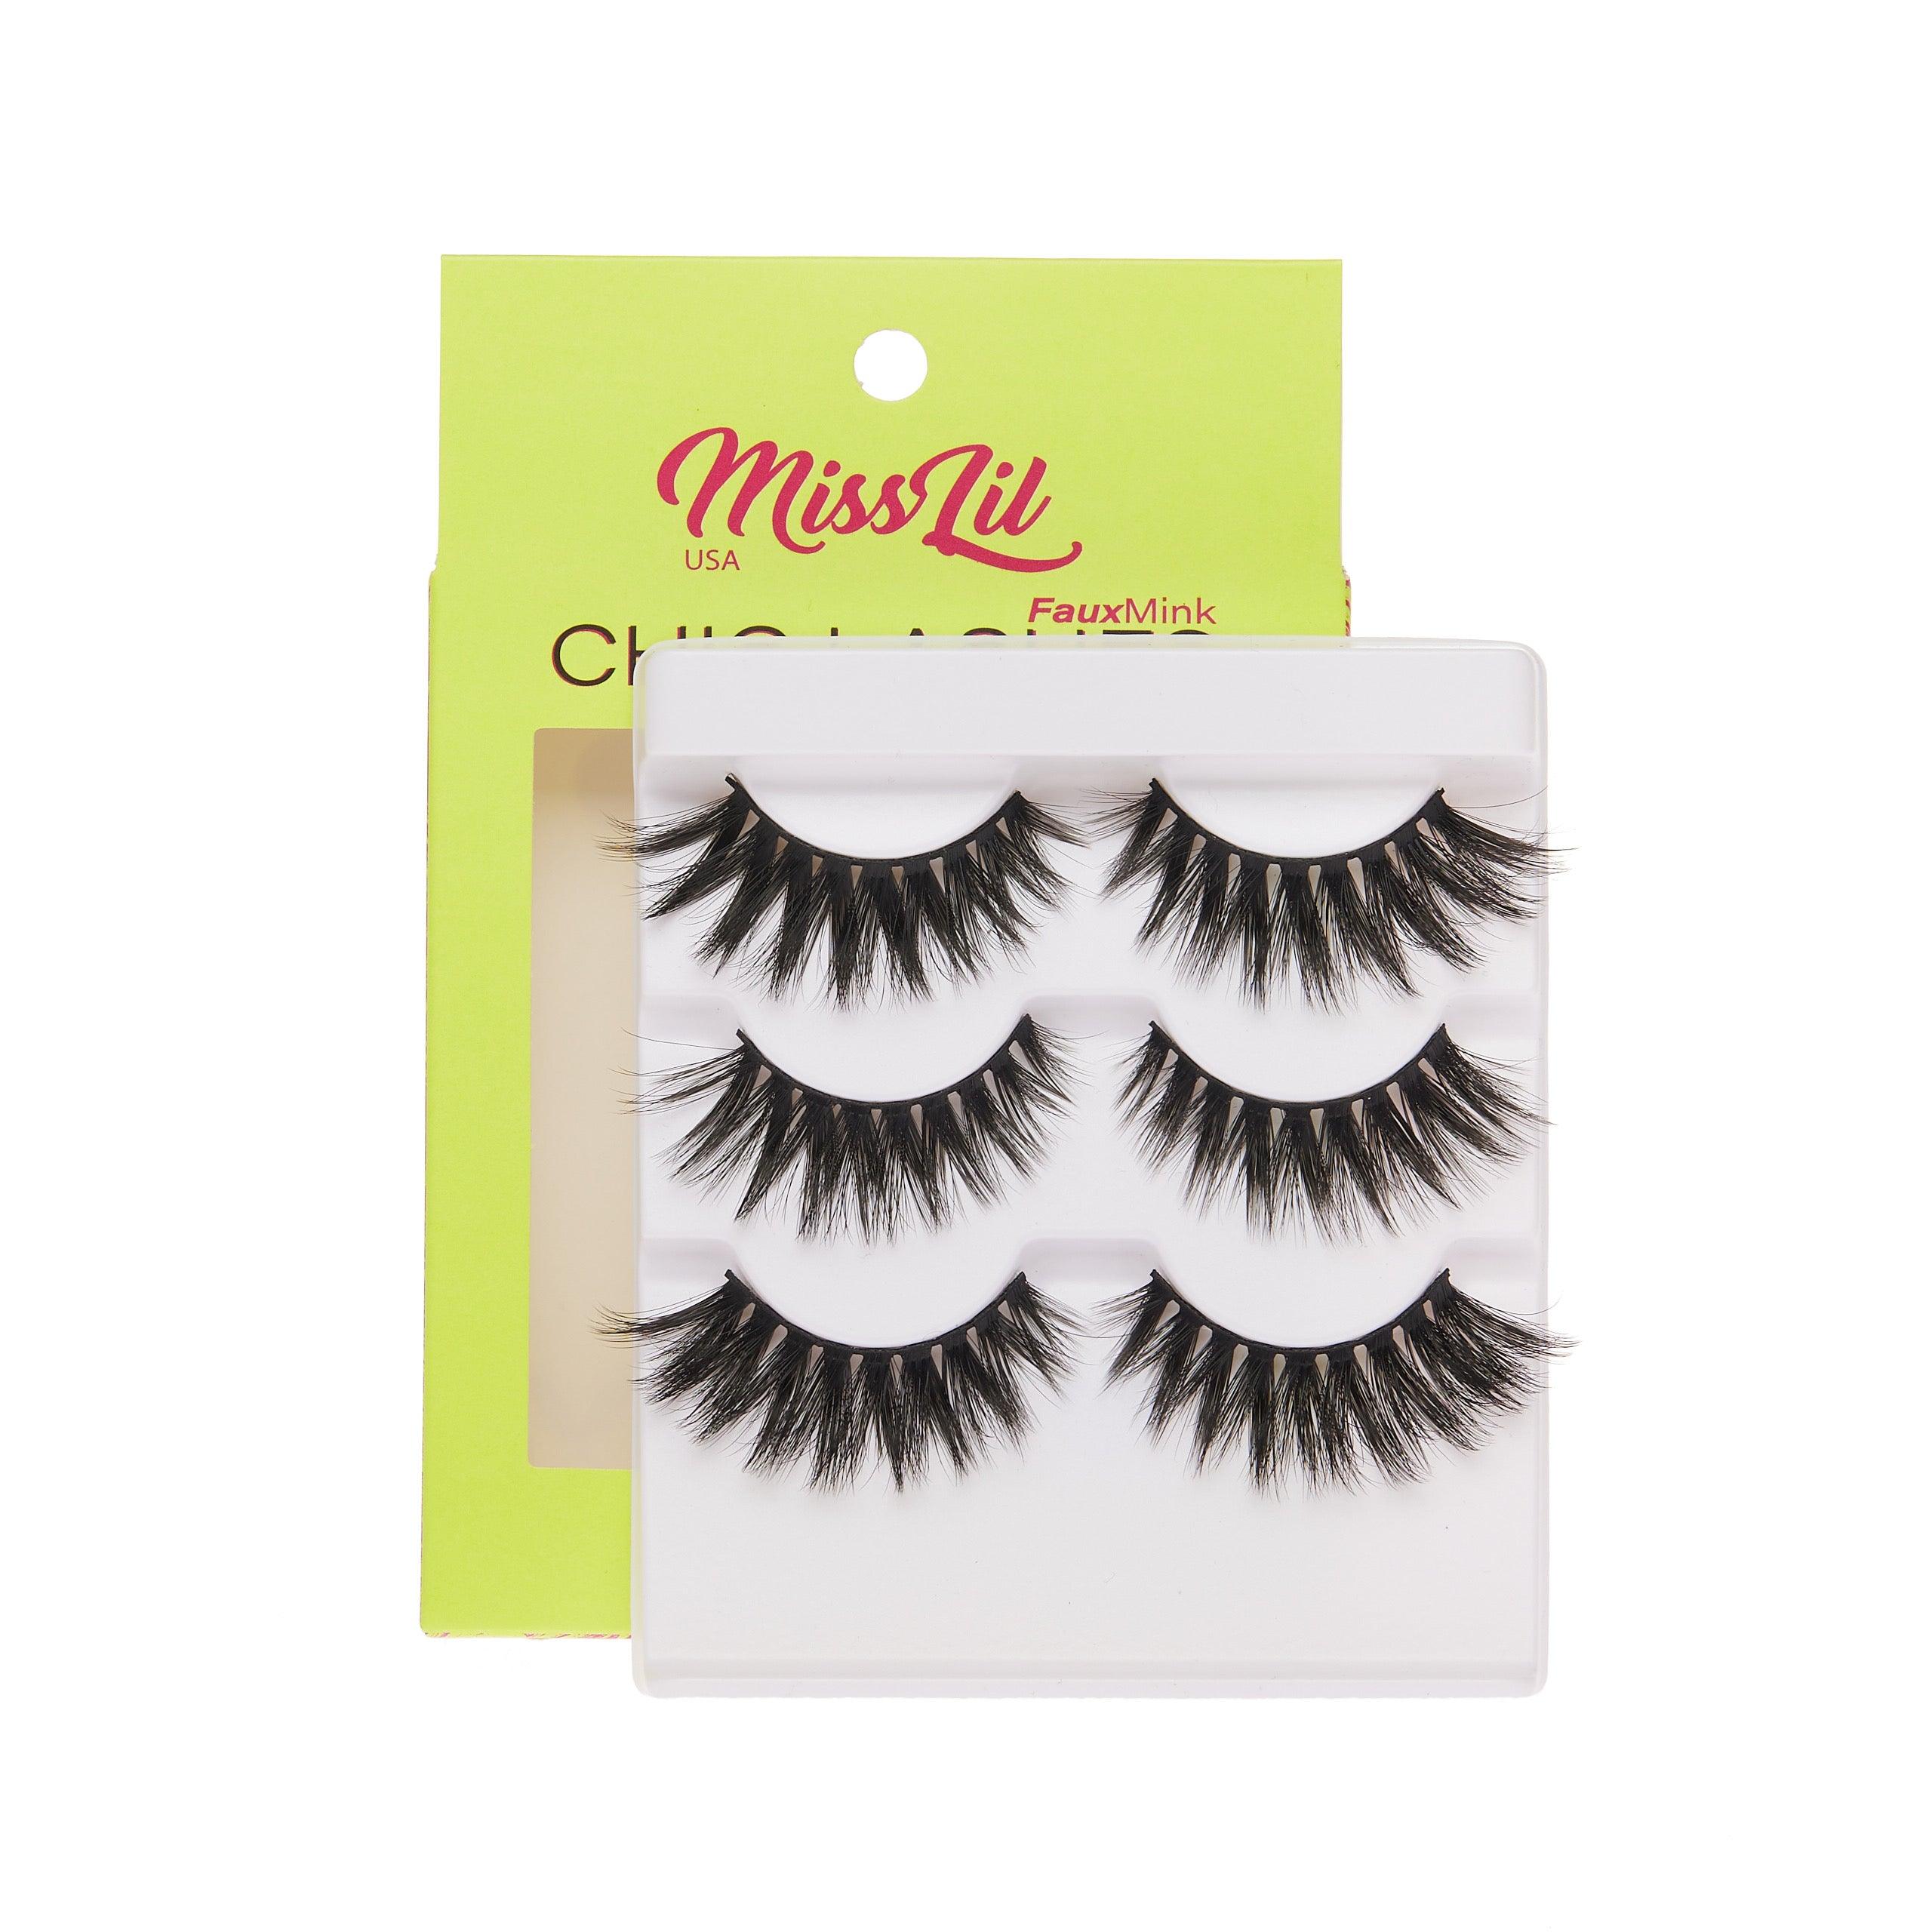 3-Pair Faux Mink Eyelashes - Chic Lashes Collection #25 - Pack of 3 - Miss Lil USA